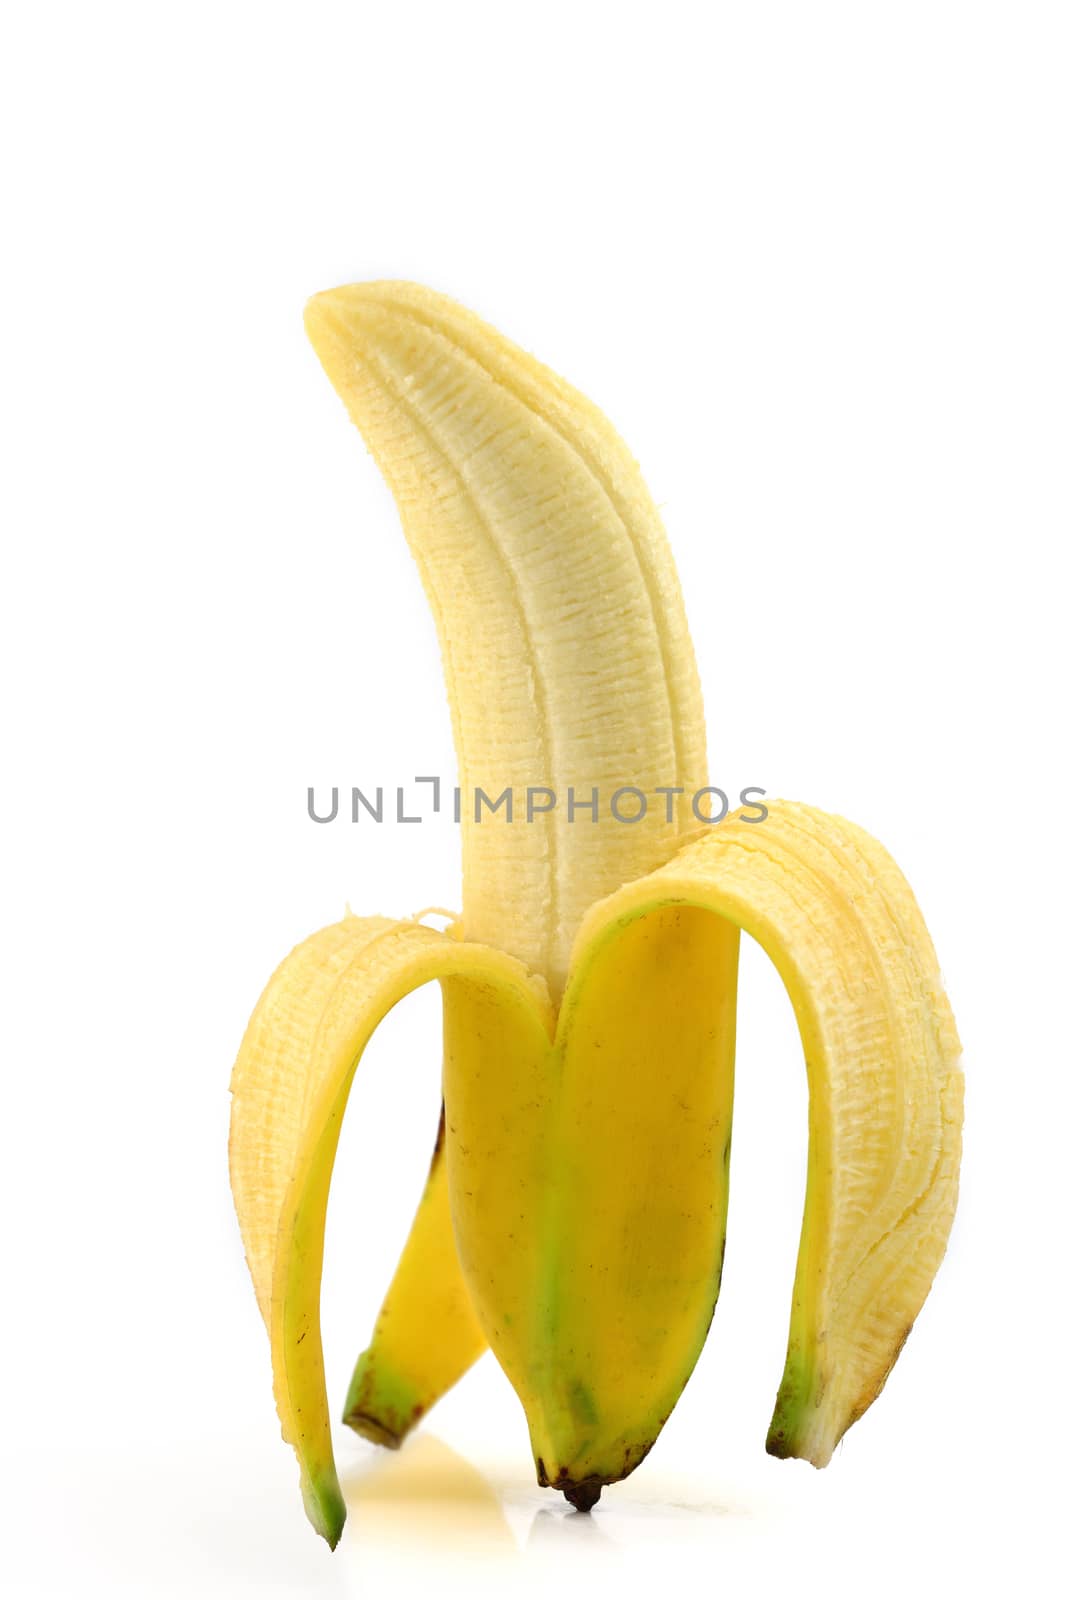 yellow banana by antpkr